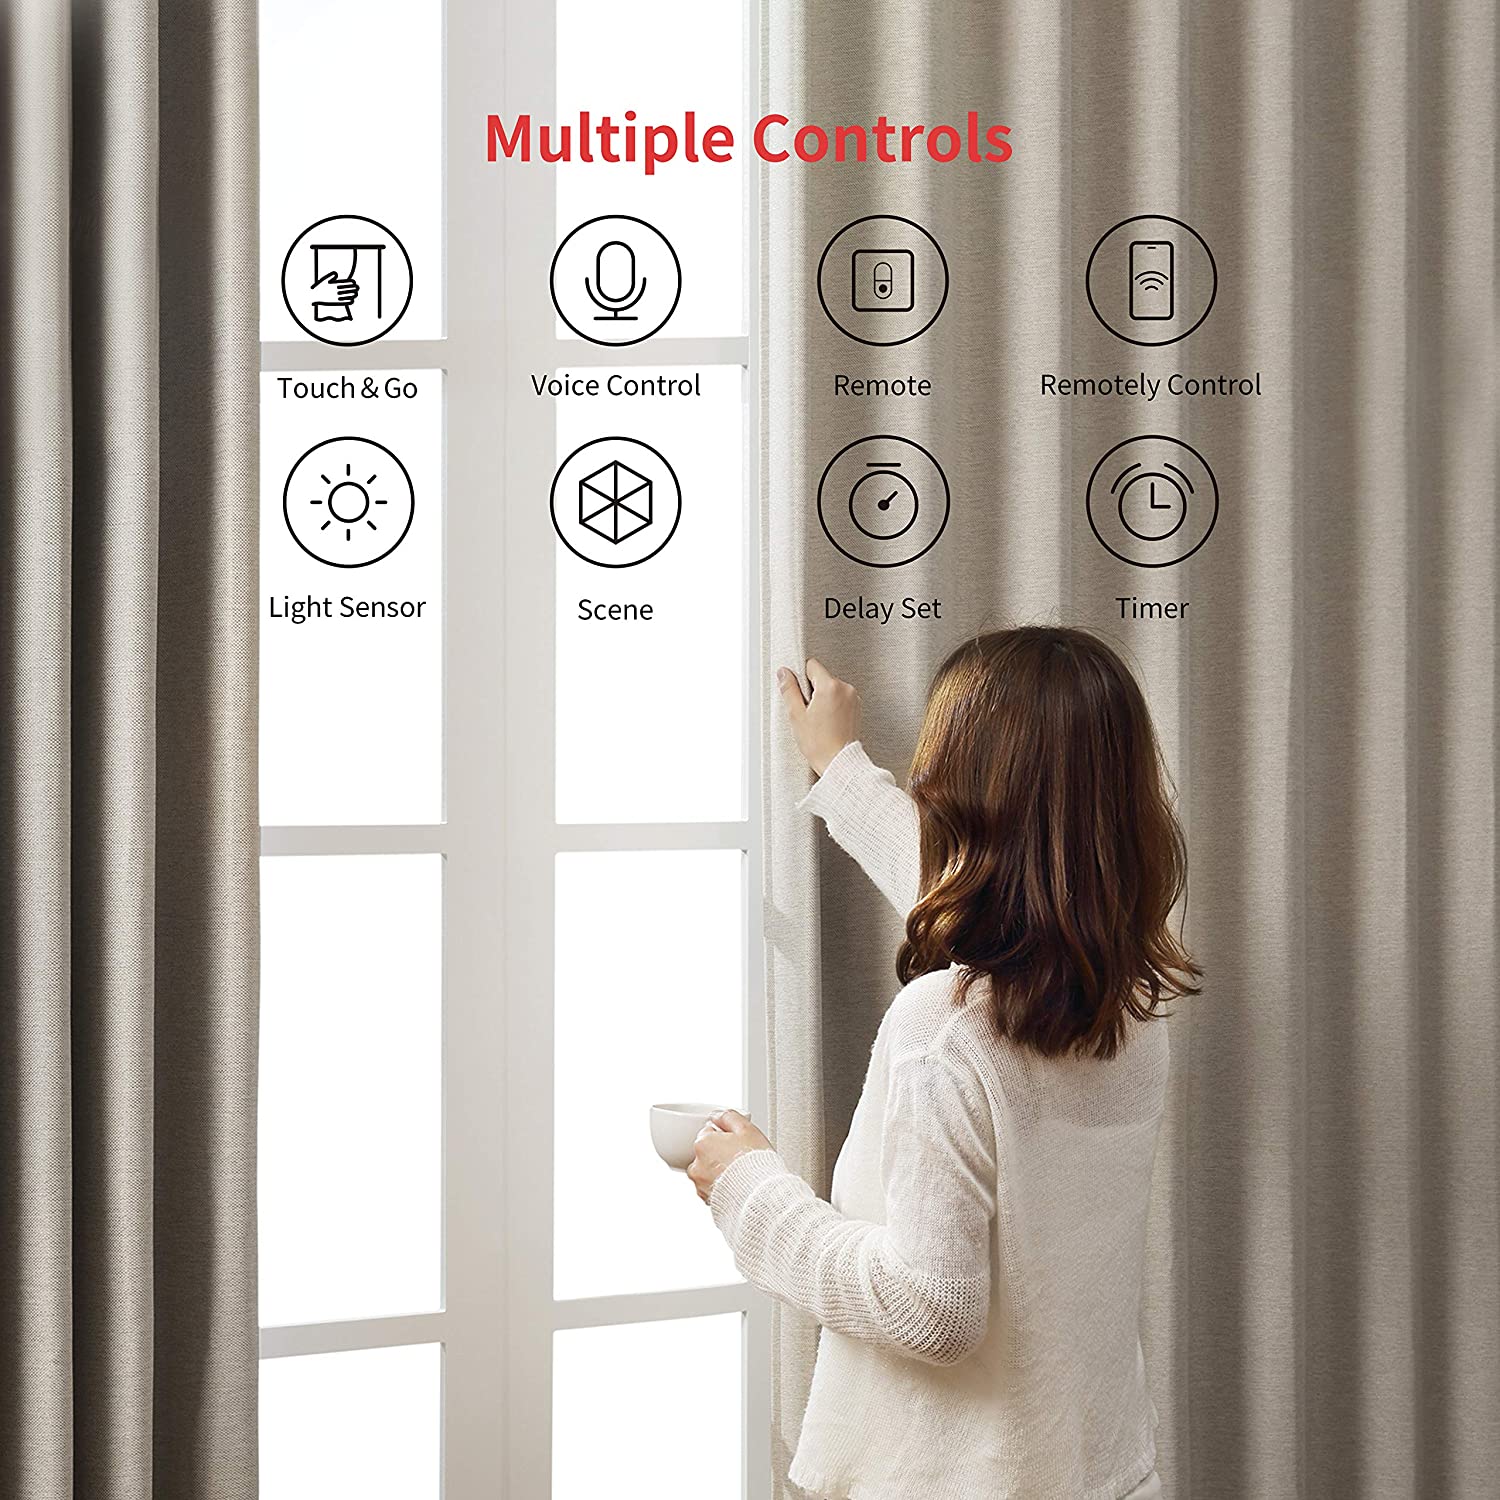 SwitchBot Curtain (U Rail) | Smart Electric Motor, Automate Timer Control, Add SwitchBot Hub Mini to Make it Compatible with Alexa, Google Home